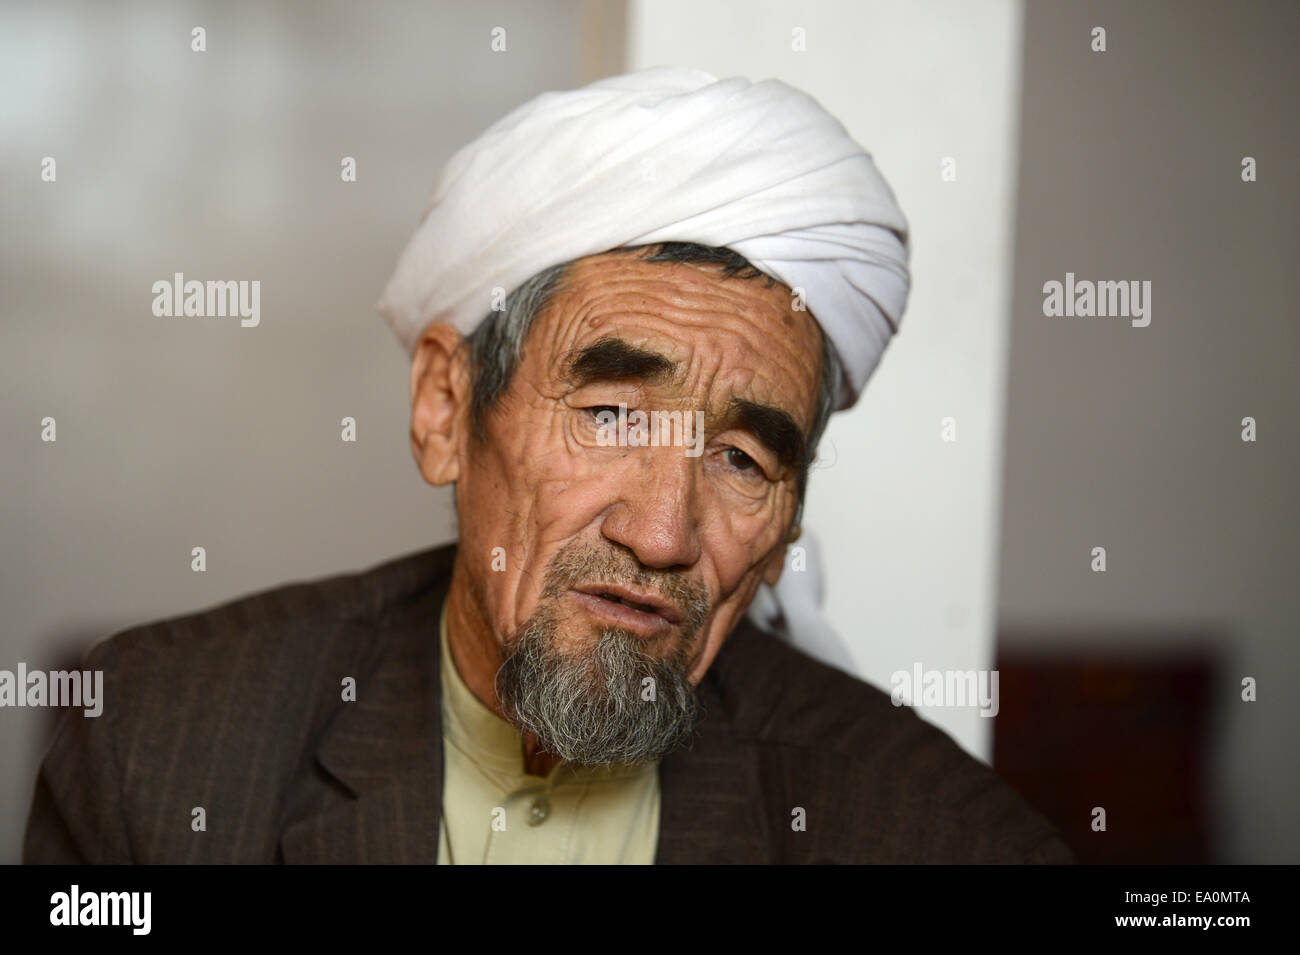 Bamian, Afghanistan. 24th Oct, 2014. The Afghani cleric Sadschad Mohsini in his home in Bamian, Afghanistan, 24 October 2014. Mohsini finds that social media is a useful tool to spread faith. In 2008 he caused an uproar after photos of him shaking the hand of the wife of then US President, Laura Bush, were shared around the world. Today the 67-year old uses social media to advise young people in matters of faith and religion. His son taught him how to navigate search engines and explained how Facebook works. Photo: Subel Bhandari/dpa/Alamy Live News Stock Photo